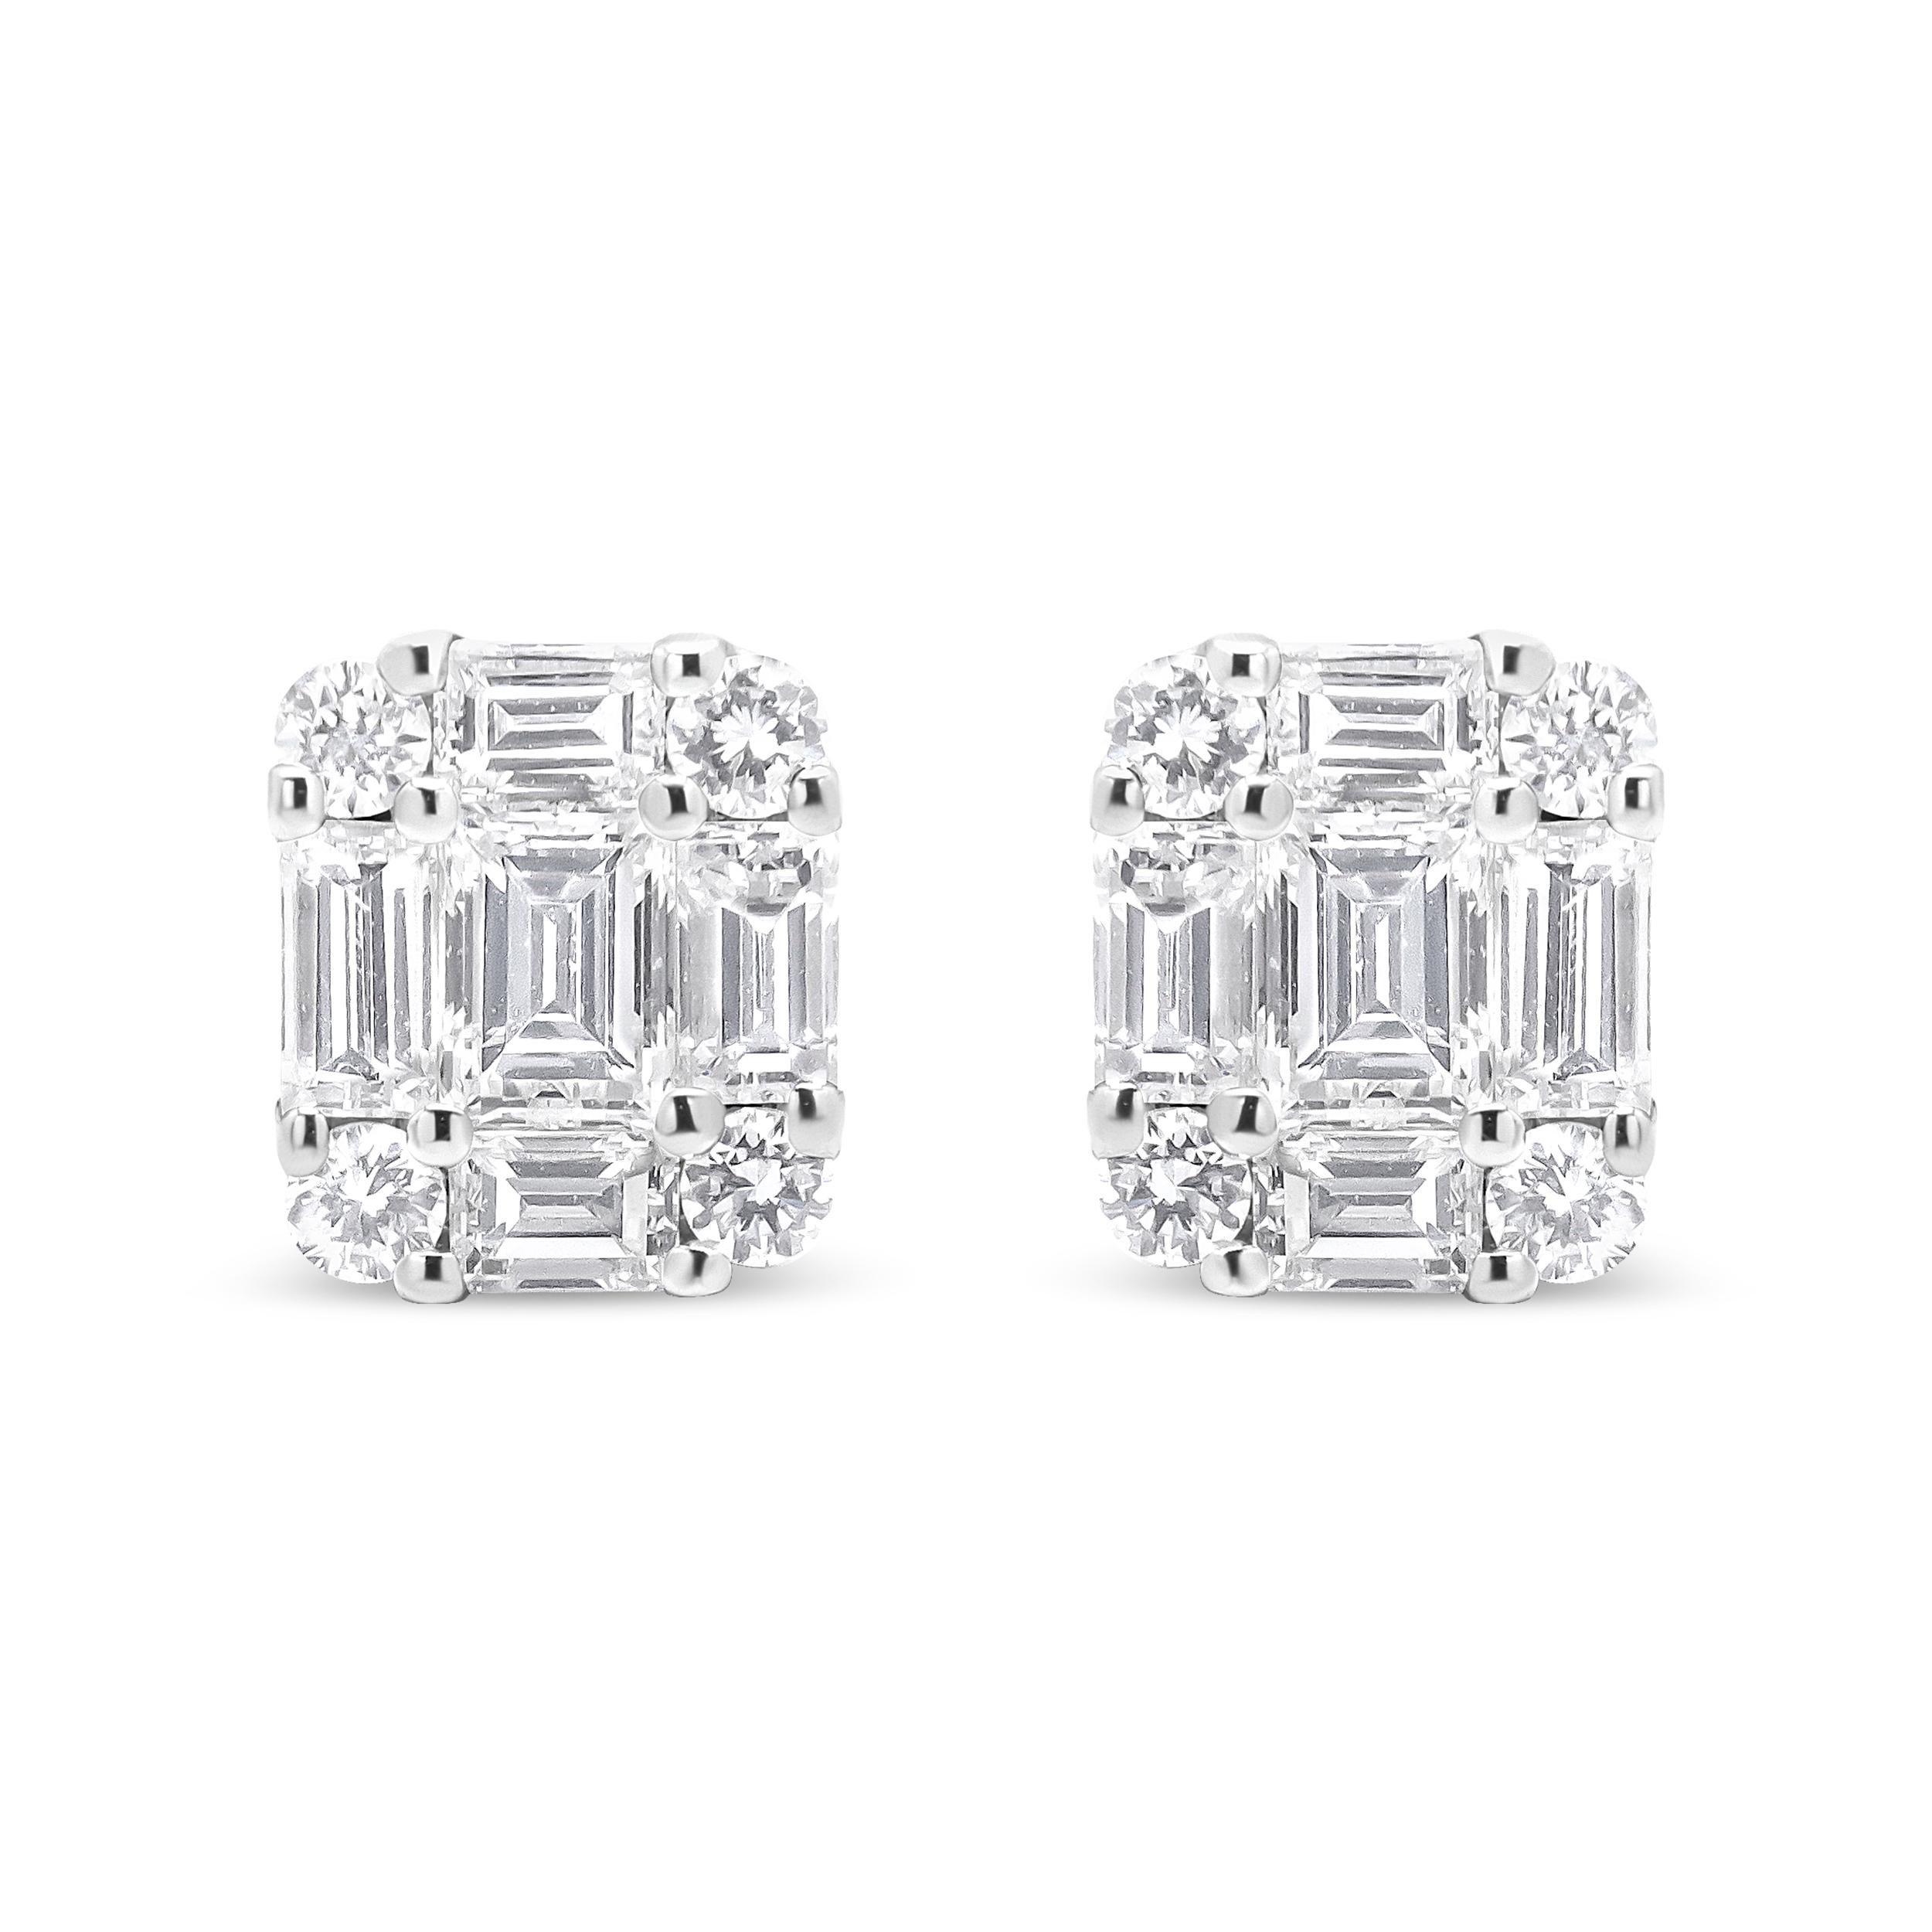 Unique in a scintillating design, these diamond cluster earrings are enhanced with special details that make them quite the fashion statement. This pair features a bold, geometric silhouette comprised of round and emerald-cut diamonds in an